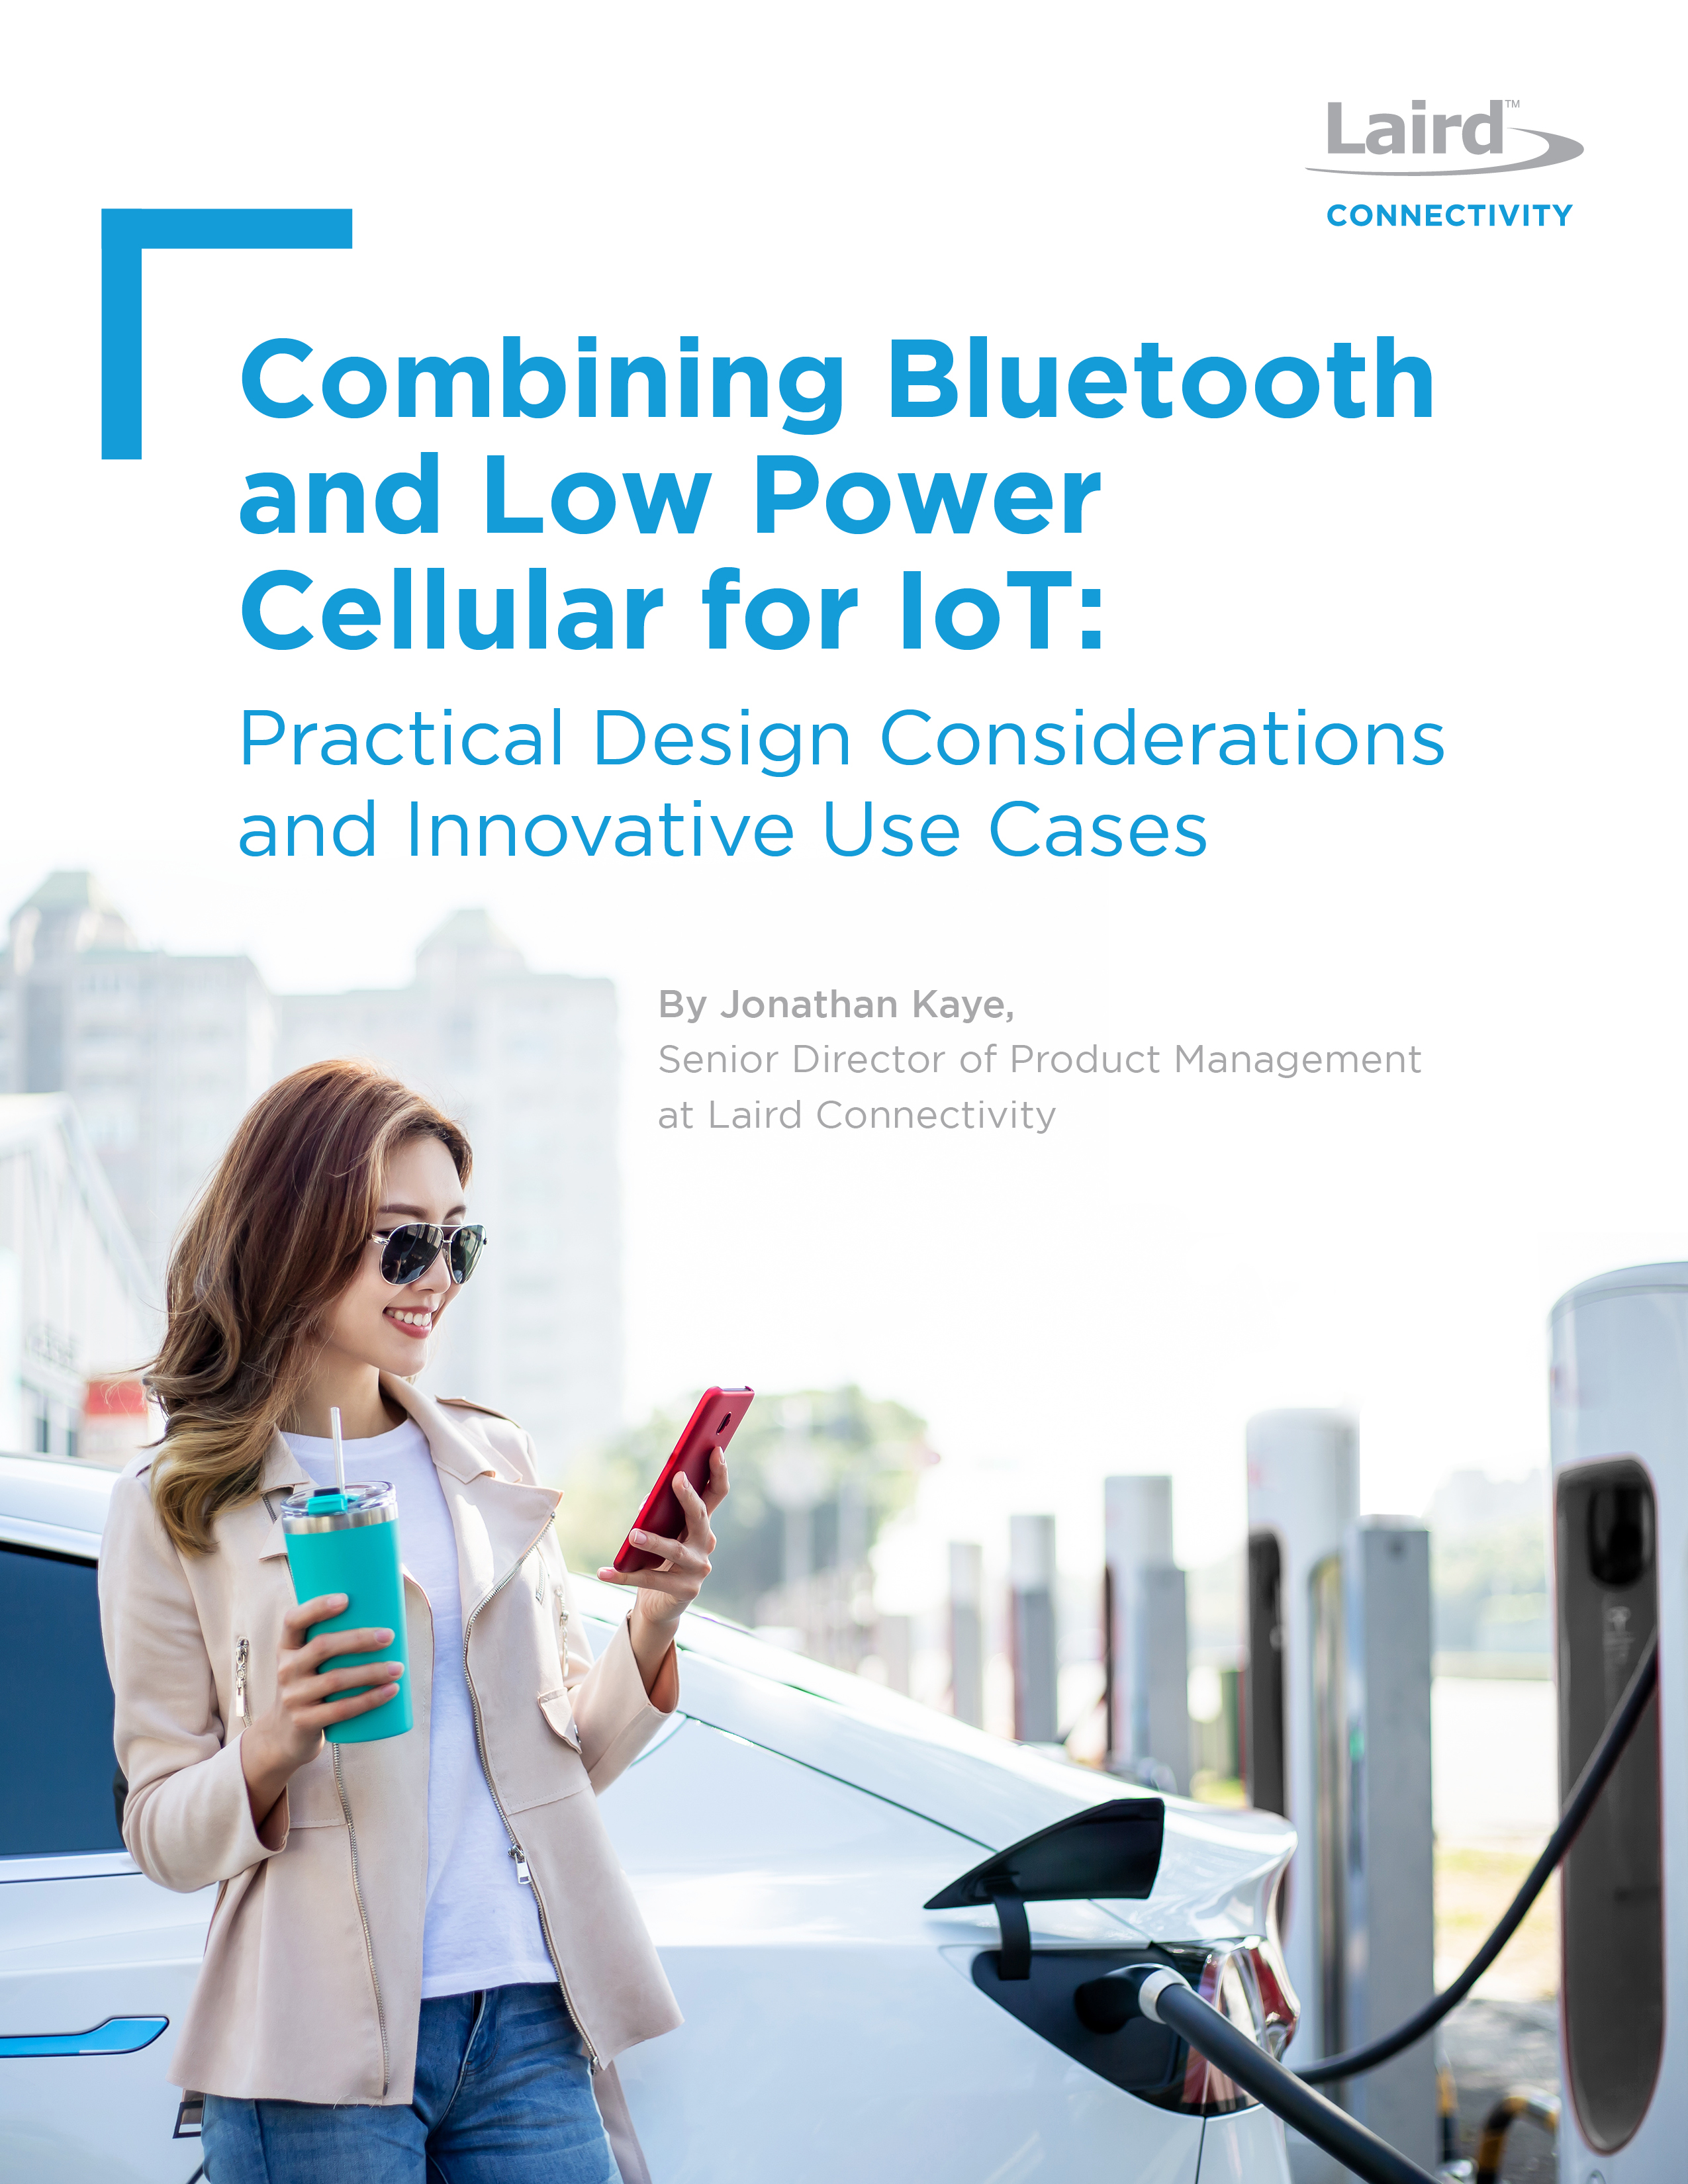 Combining Bluetooth and Low Power Cellular for IoT: Practical Design Considerations and Innovative Use Cases